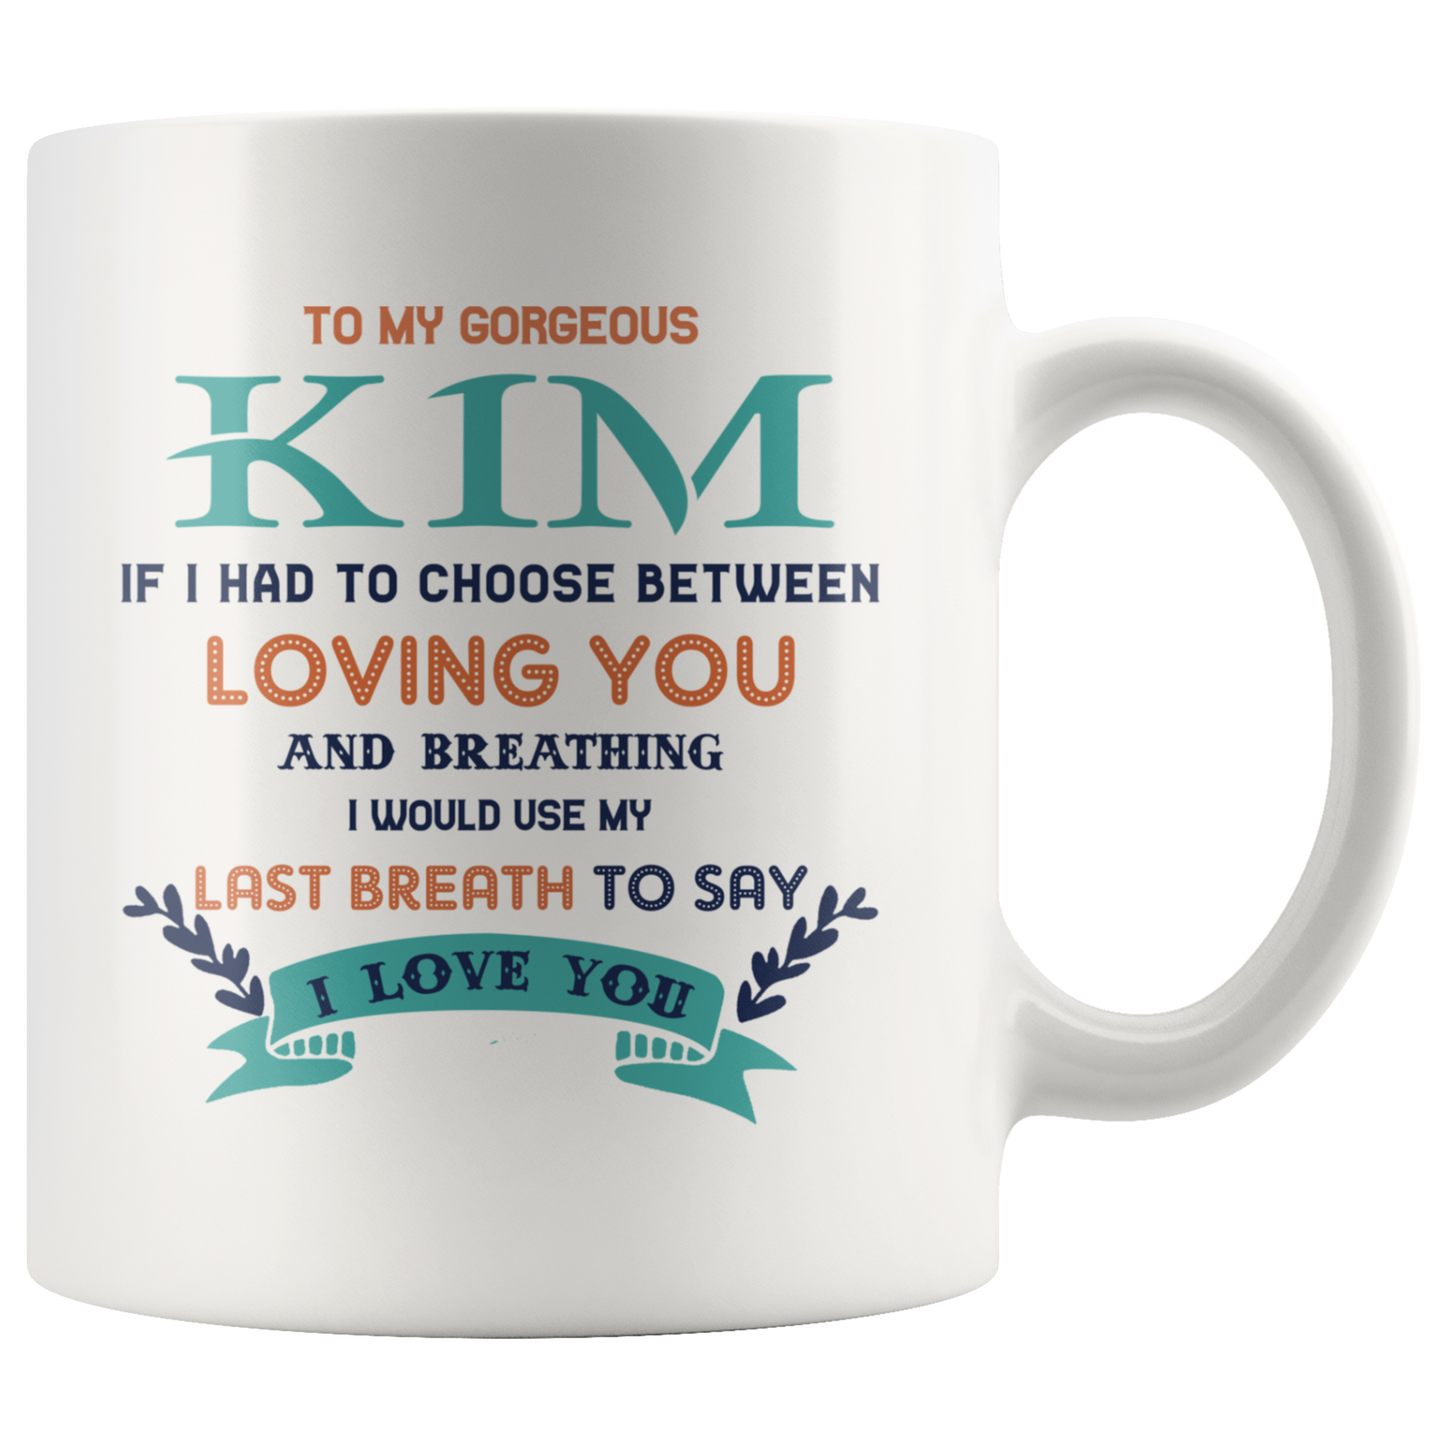 ND20393455-sp-18876 - Happy Christmas Gift For Wife From Husband Coffee Mug 11oz -